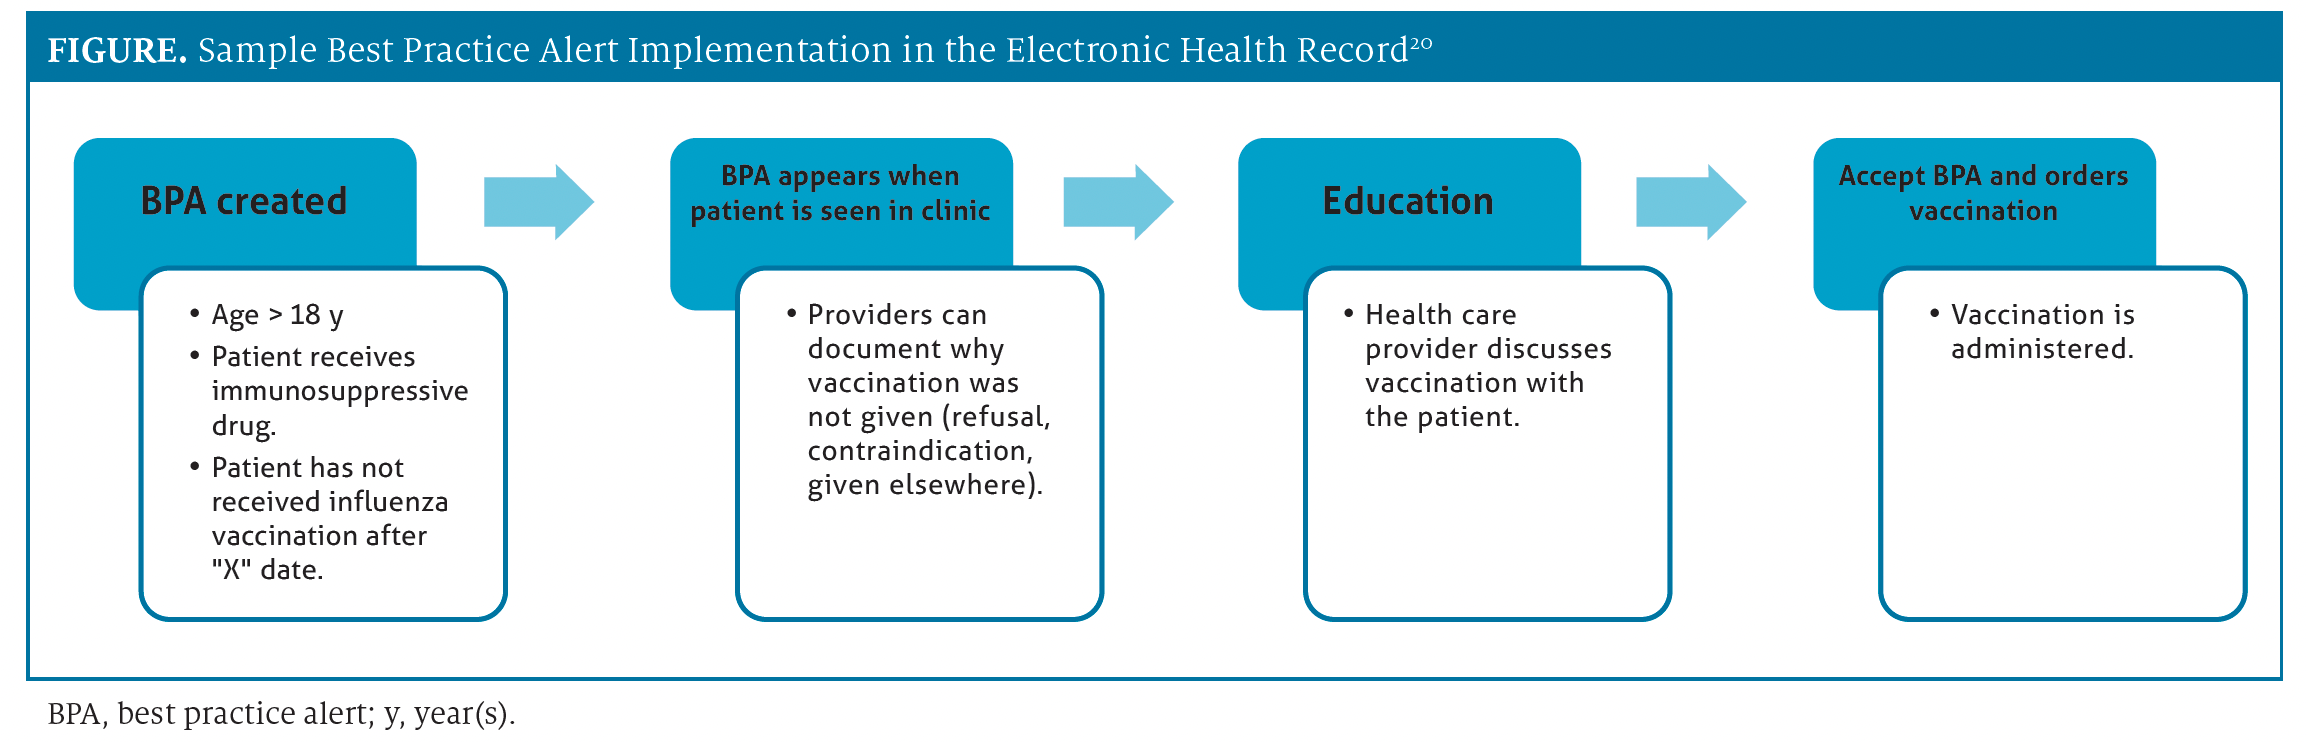 Sample Best Practice Alert Implementation in the Electronic Health Record